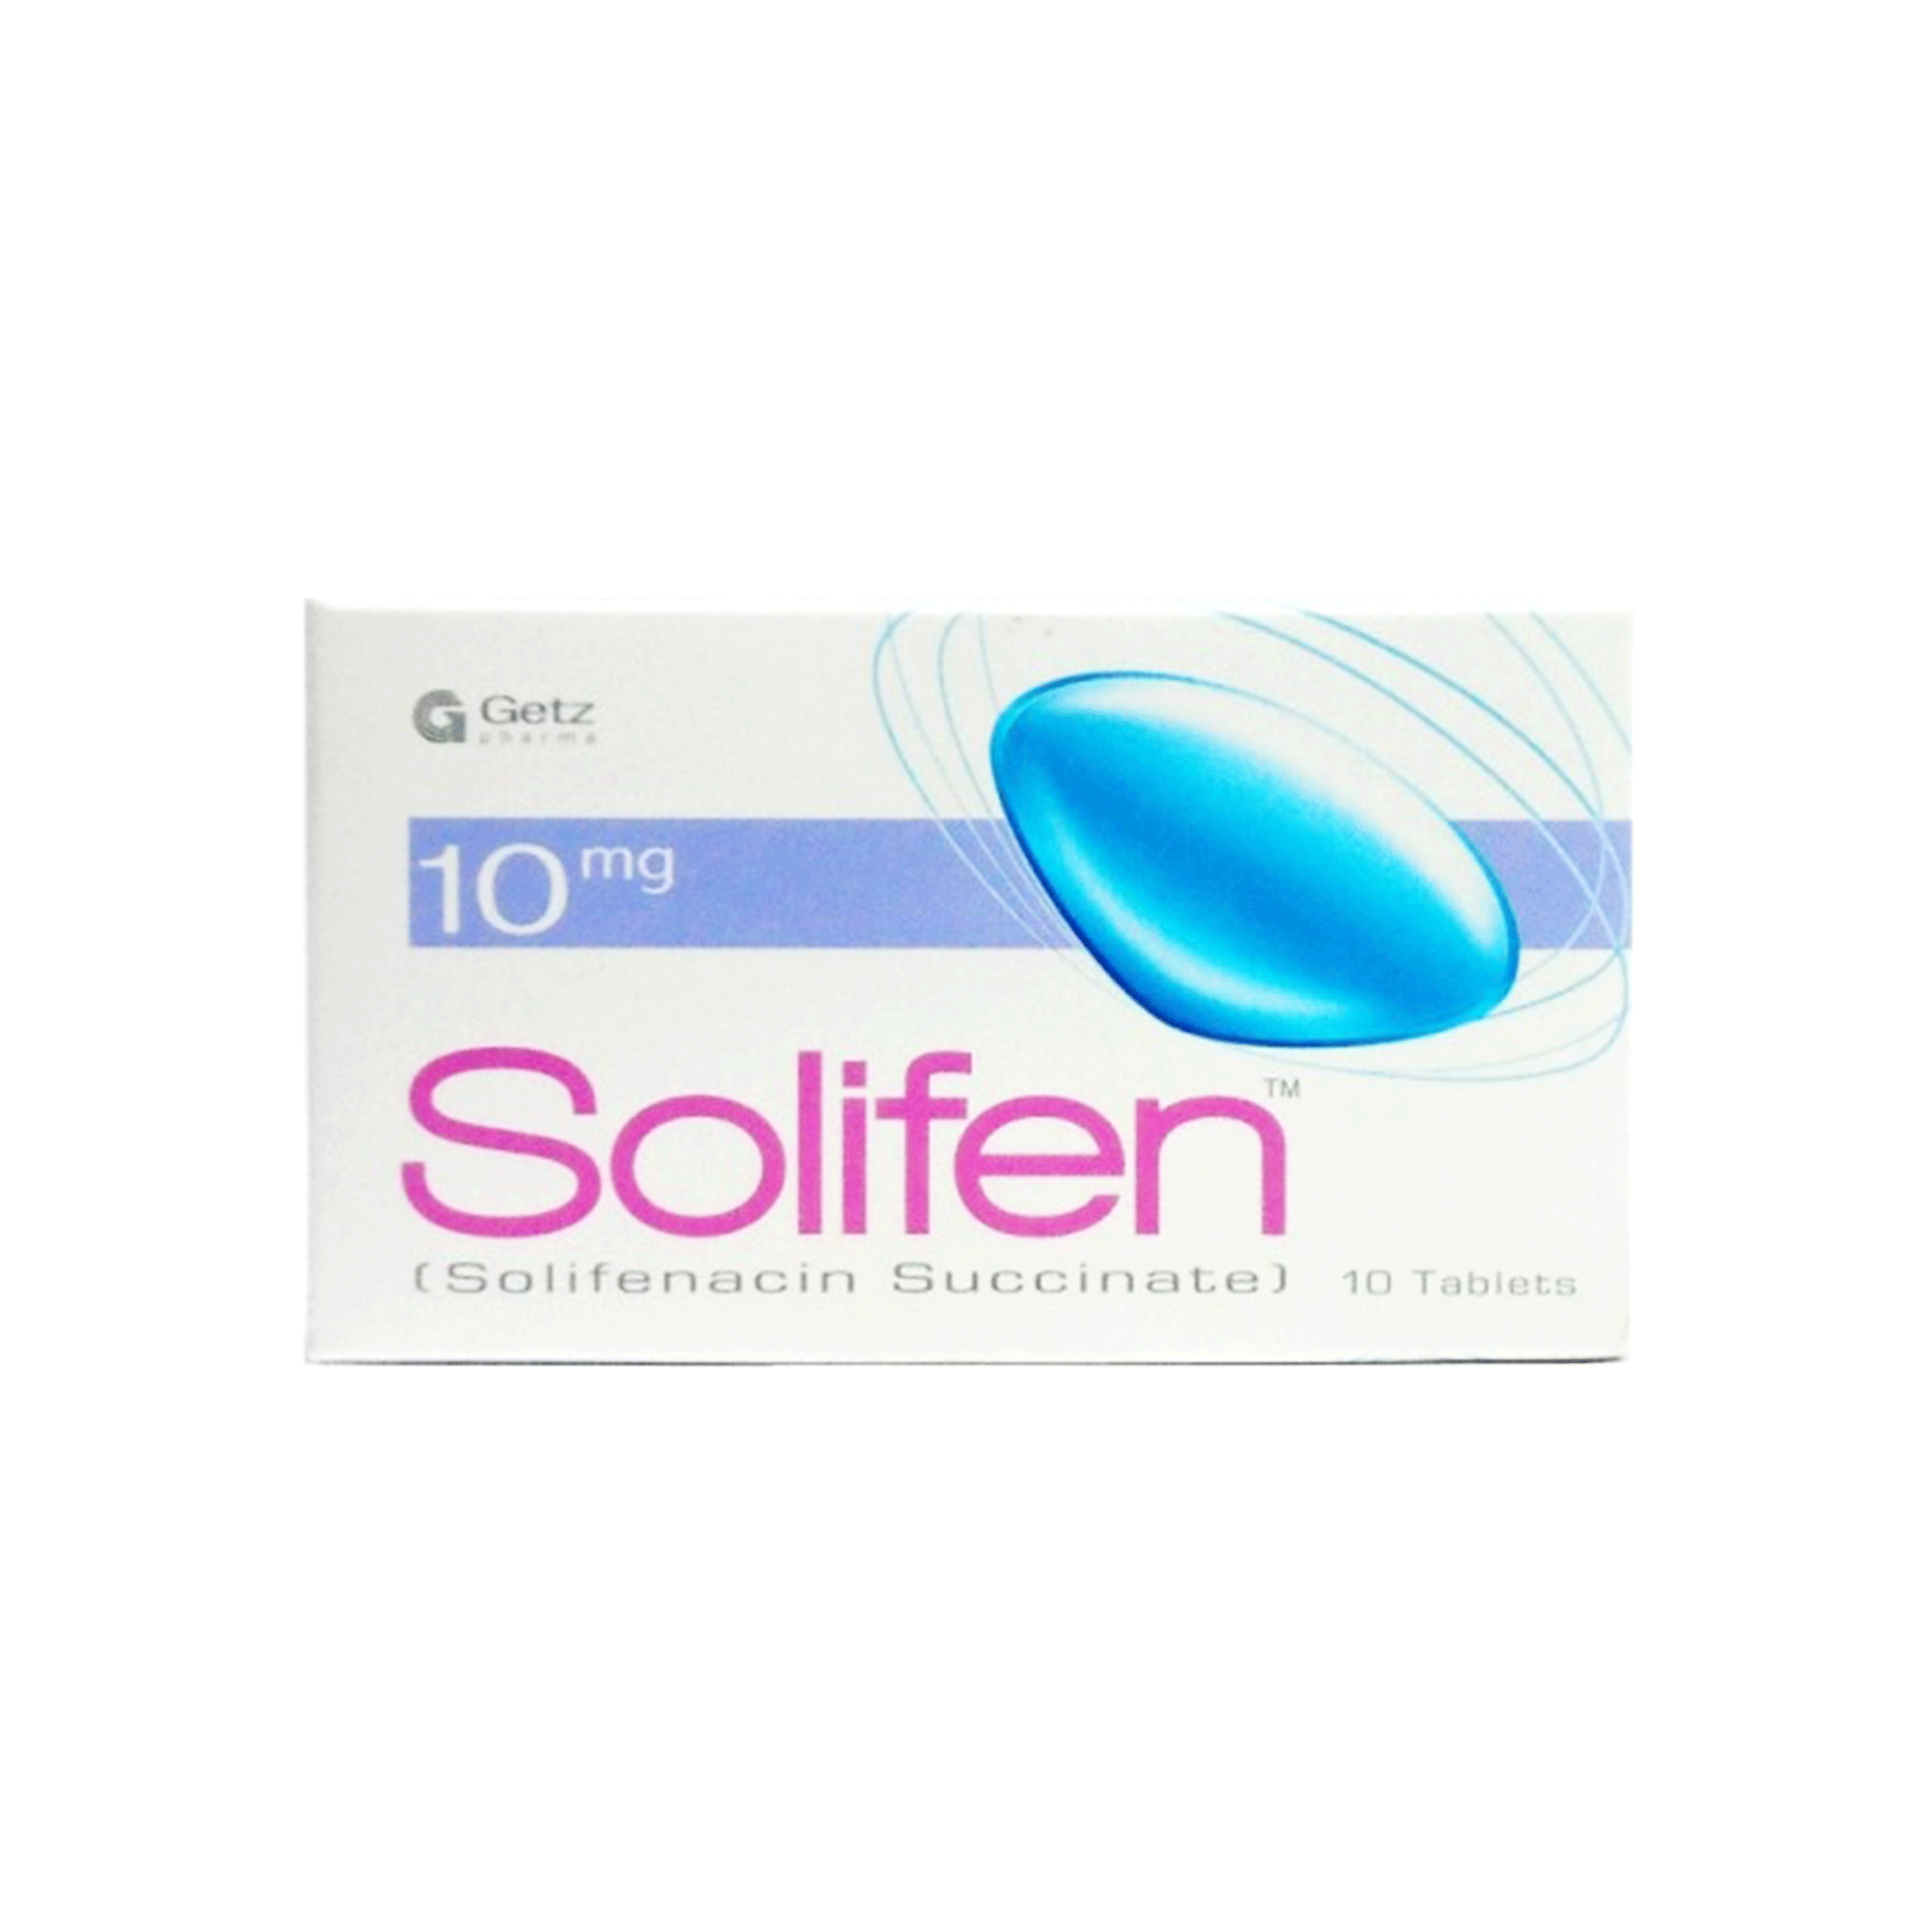 Solifen Tablets 10mg 10's